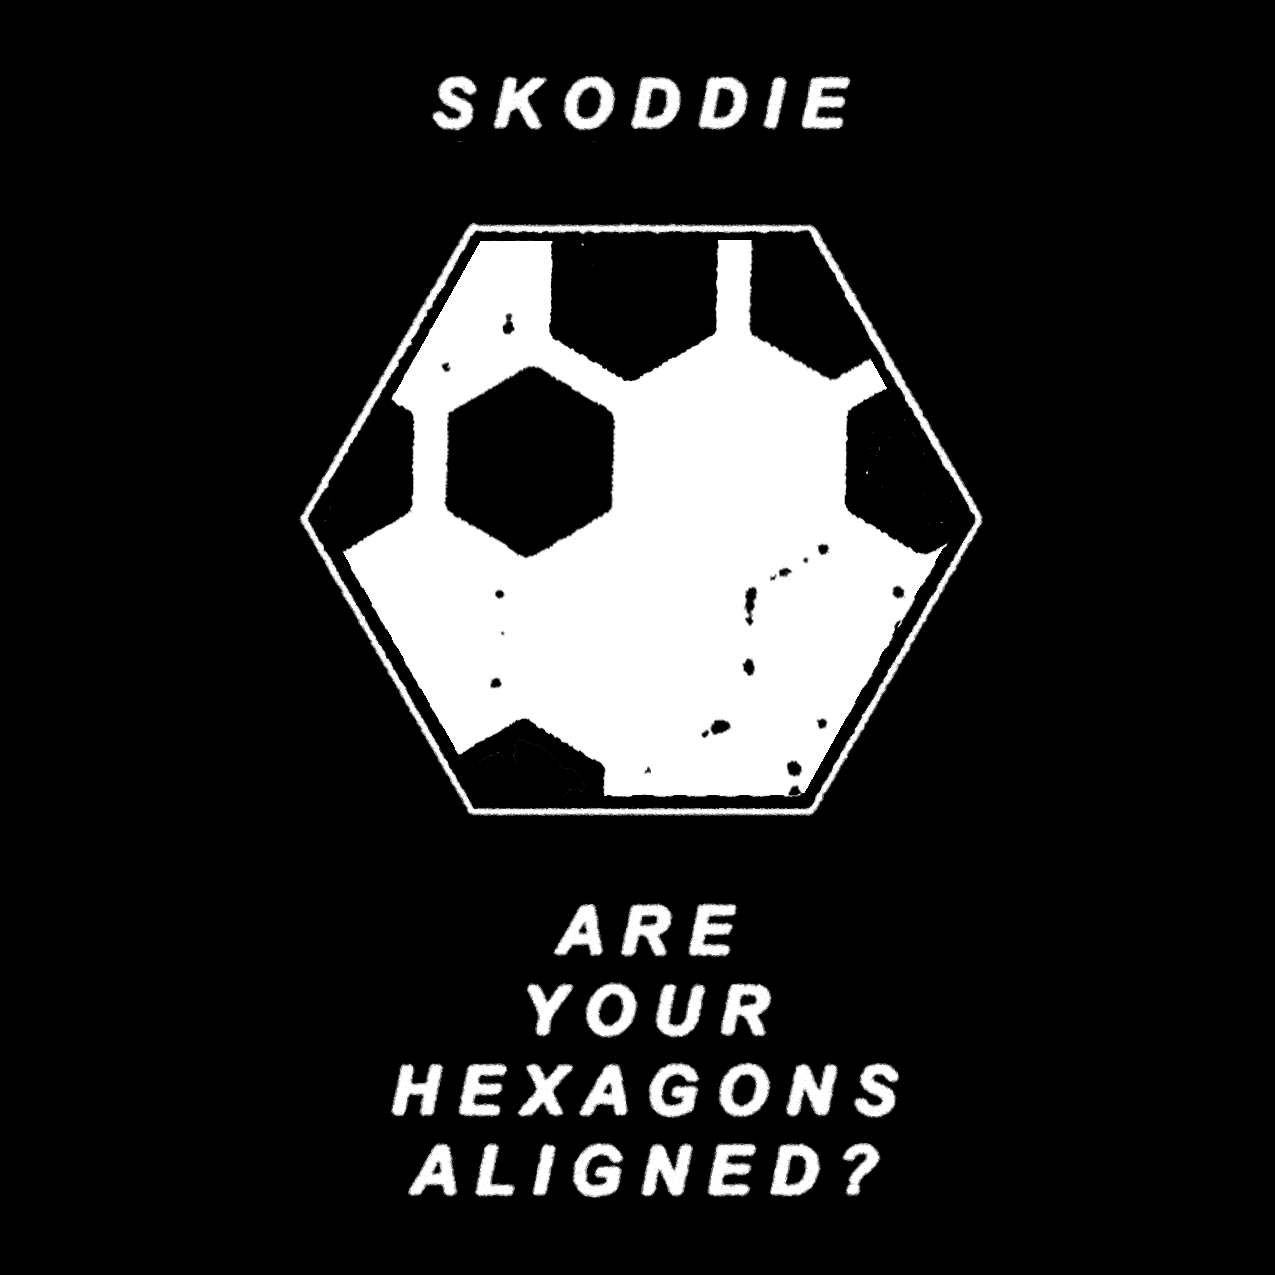 Are your hexagons aligned?